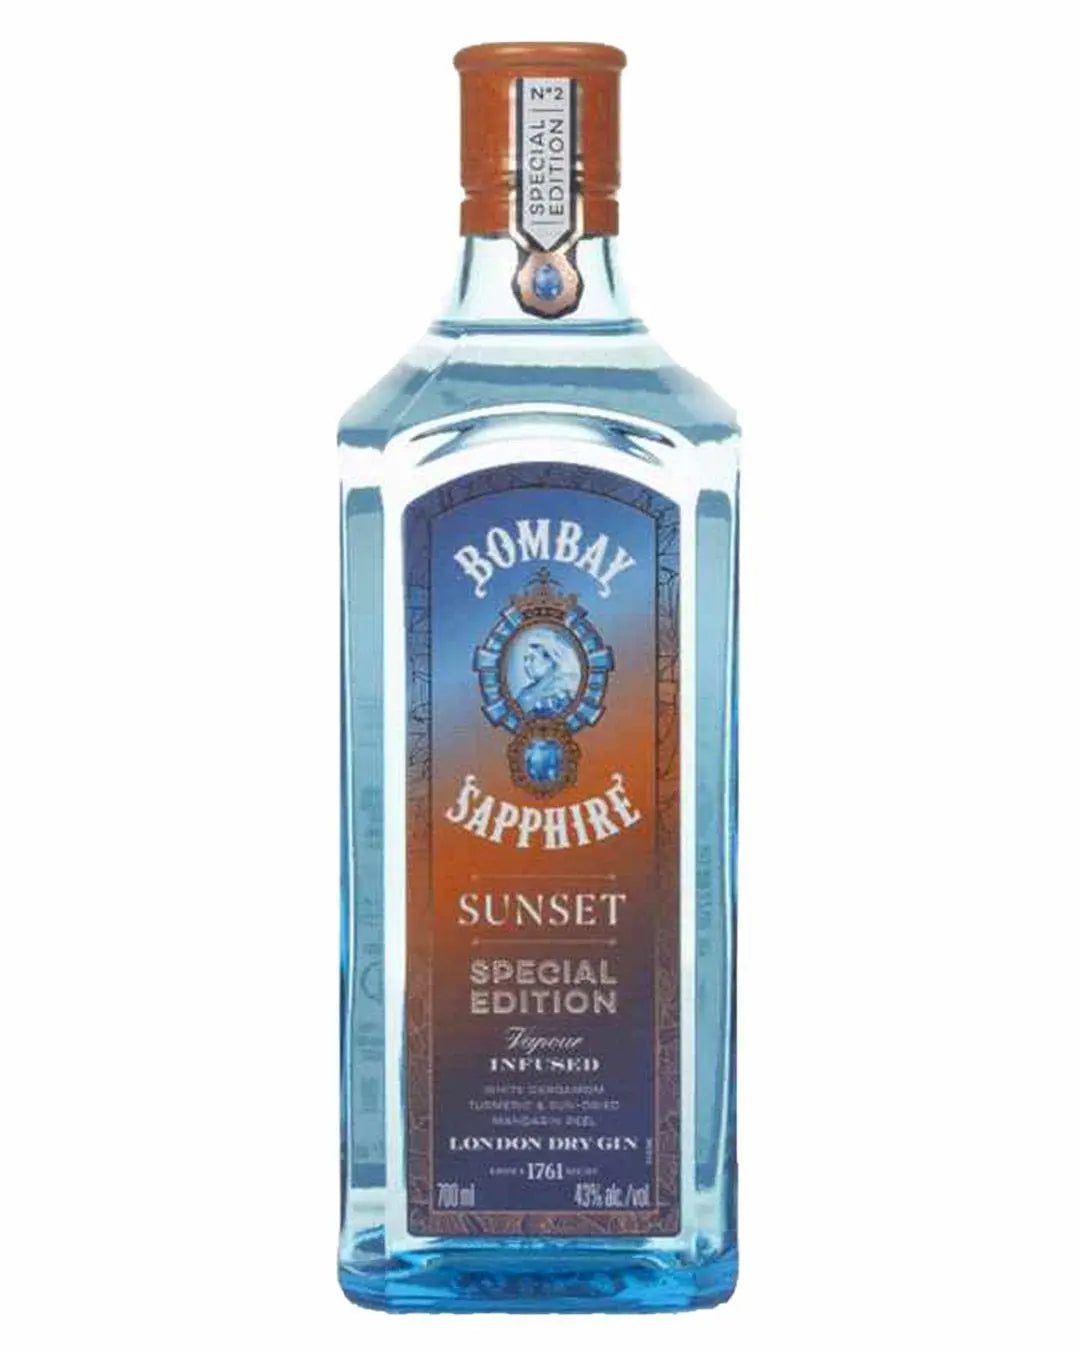 Limited Edition Bombay Sapphire Sunset Gin, 70 cl Gin 7640175743284